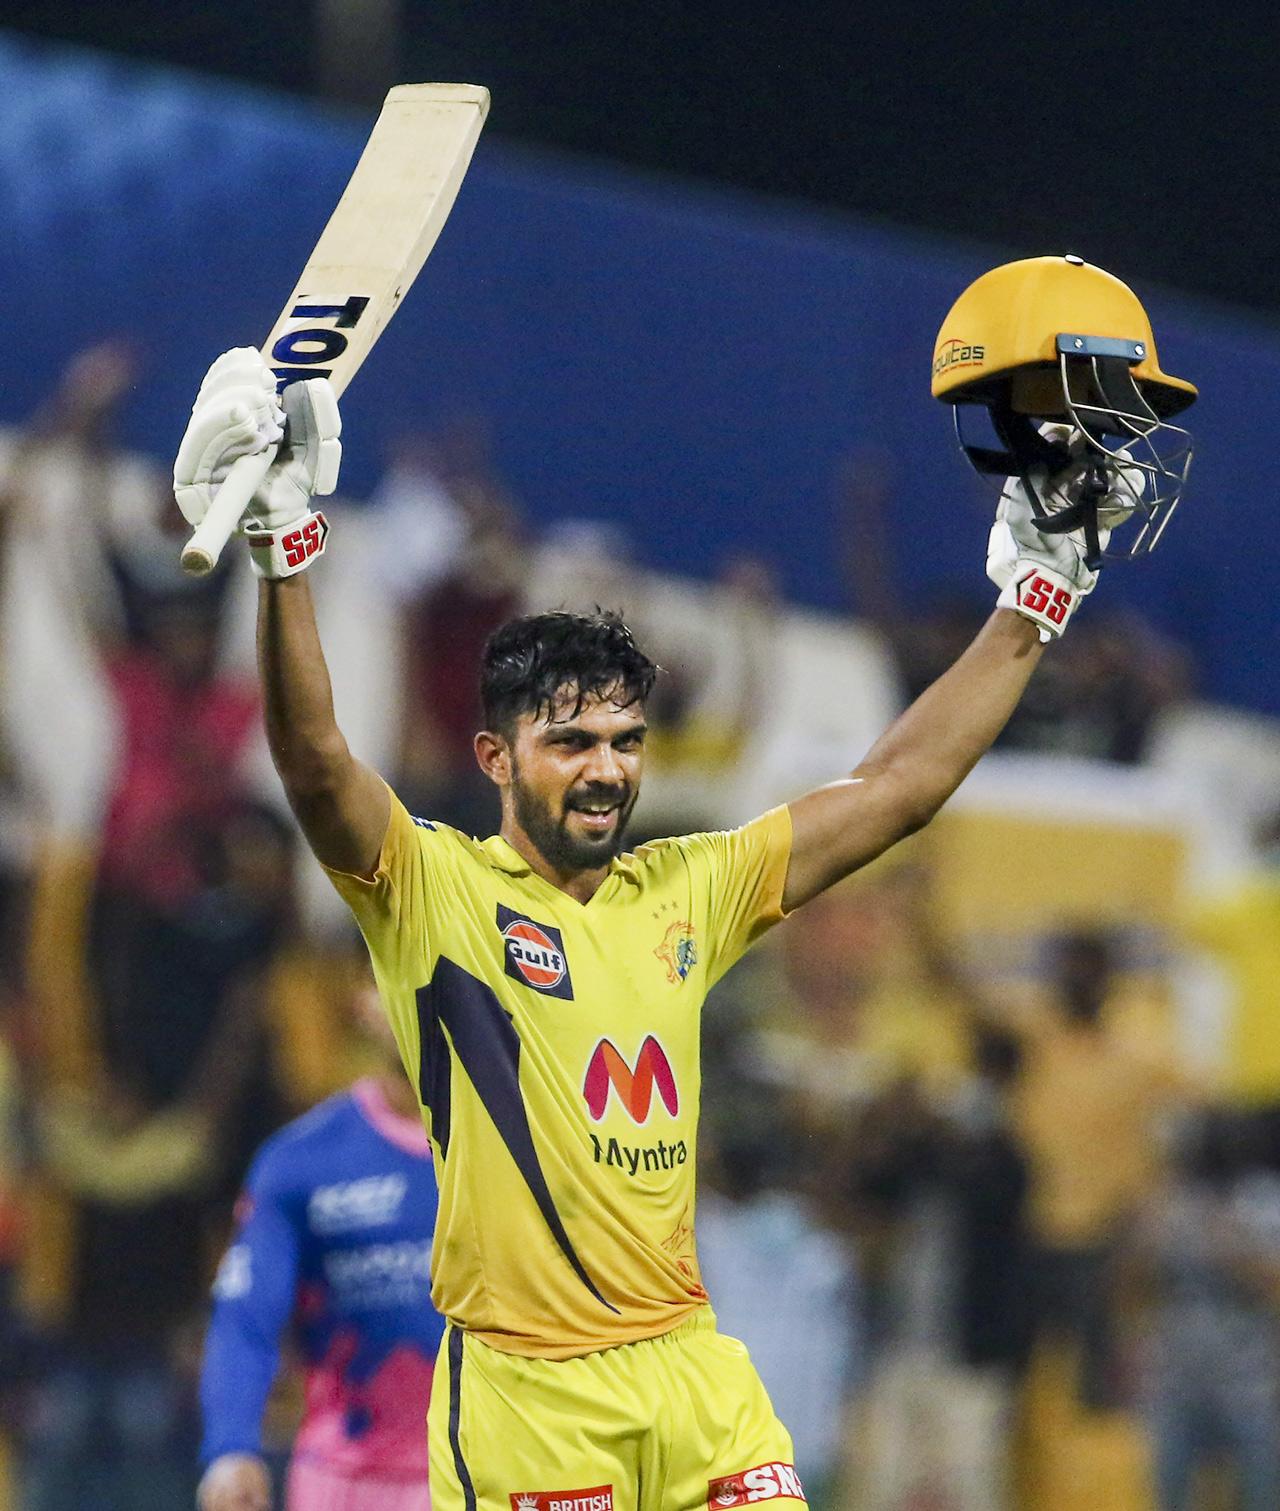 Chennai Super Kings' batsman Ruturaj Gaikwad has undoubtedly been the top performer for the team at IPL 2021. Gaikwad smashed an unbeaten century (101) in just 60 balls but it was not enough as Rajasthan Royals chased down CSK's target of 190. Gaikwad was still adjudged man-of-the-match